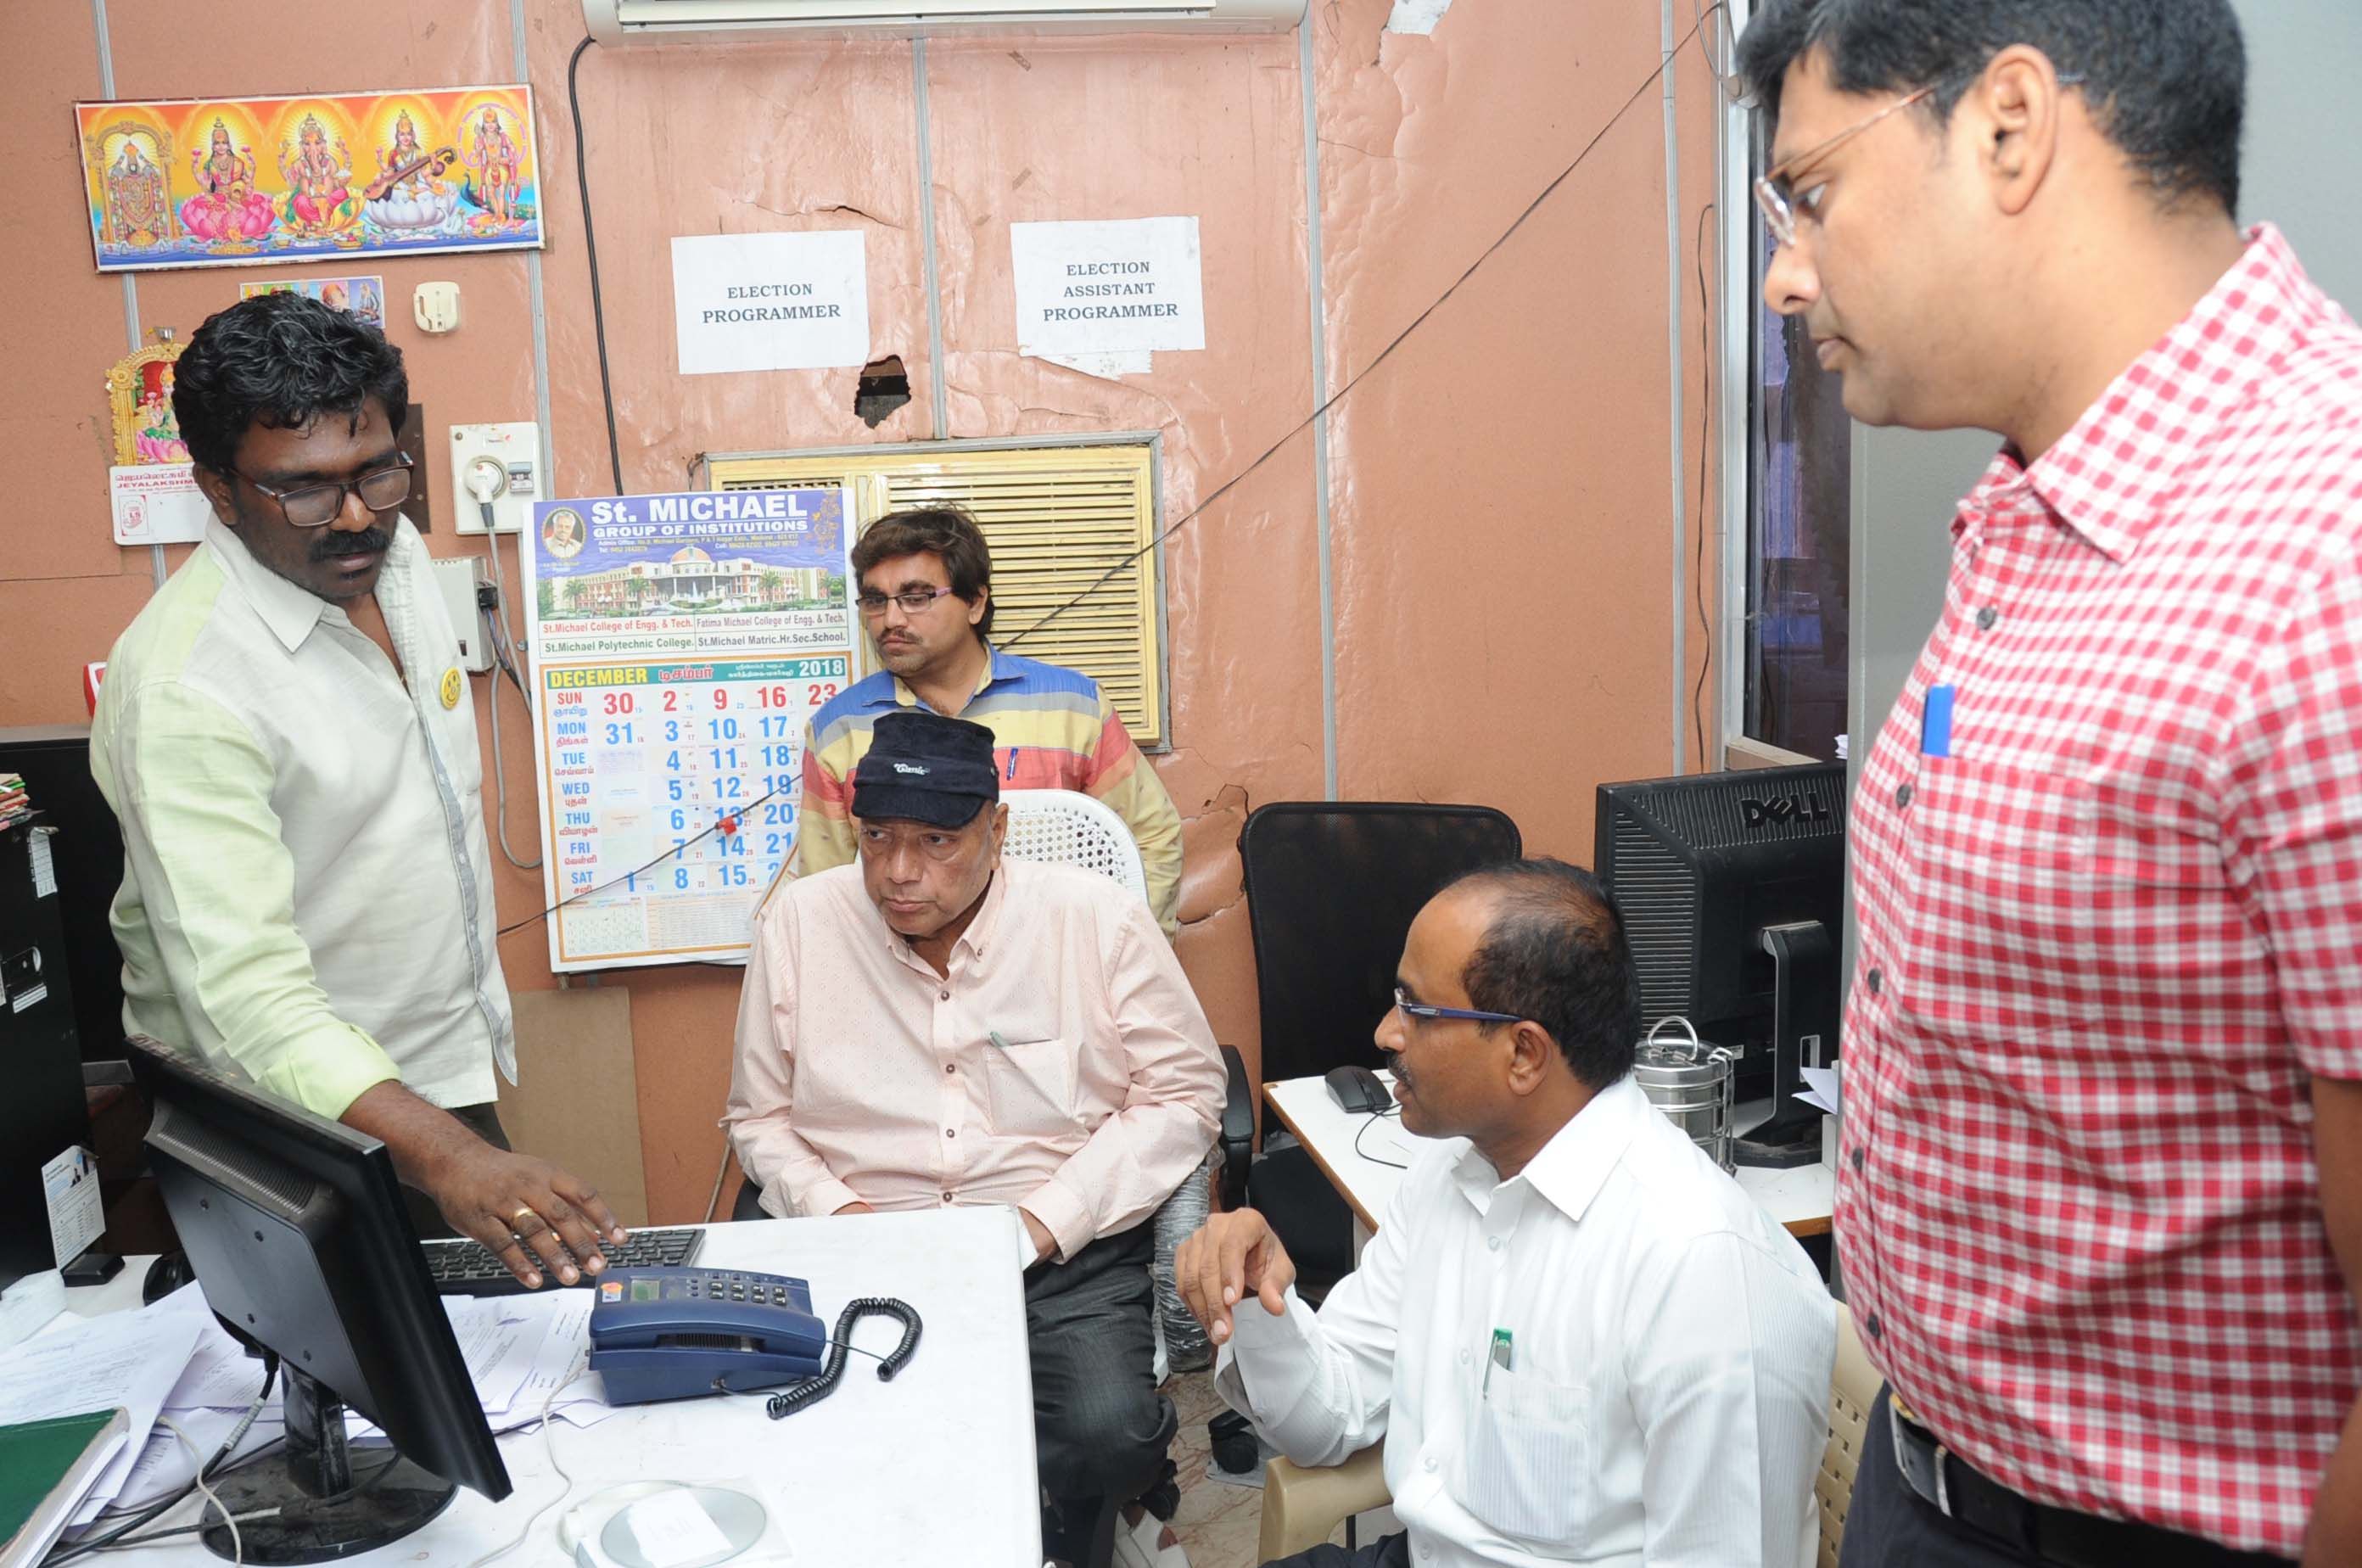 Madurai parliamentary general observer and District collector/Returning office inspected the Randomisation process of polling personnel for election duty on Madurai  north-collectorate campus at 04.04.2019